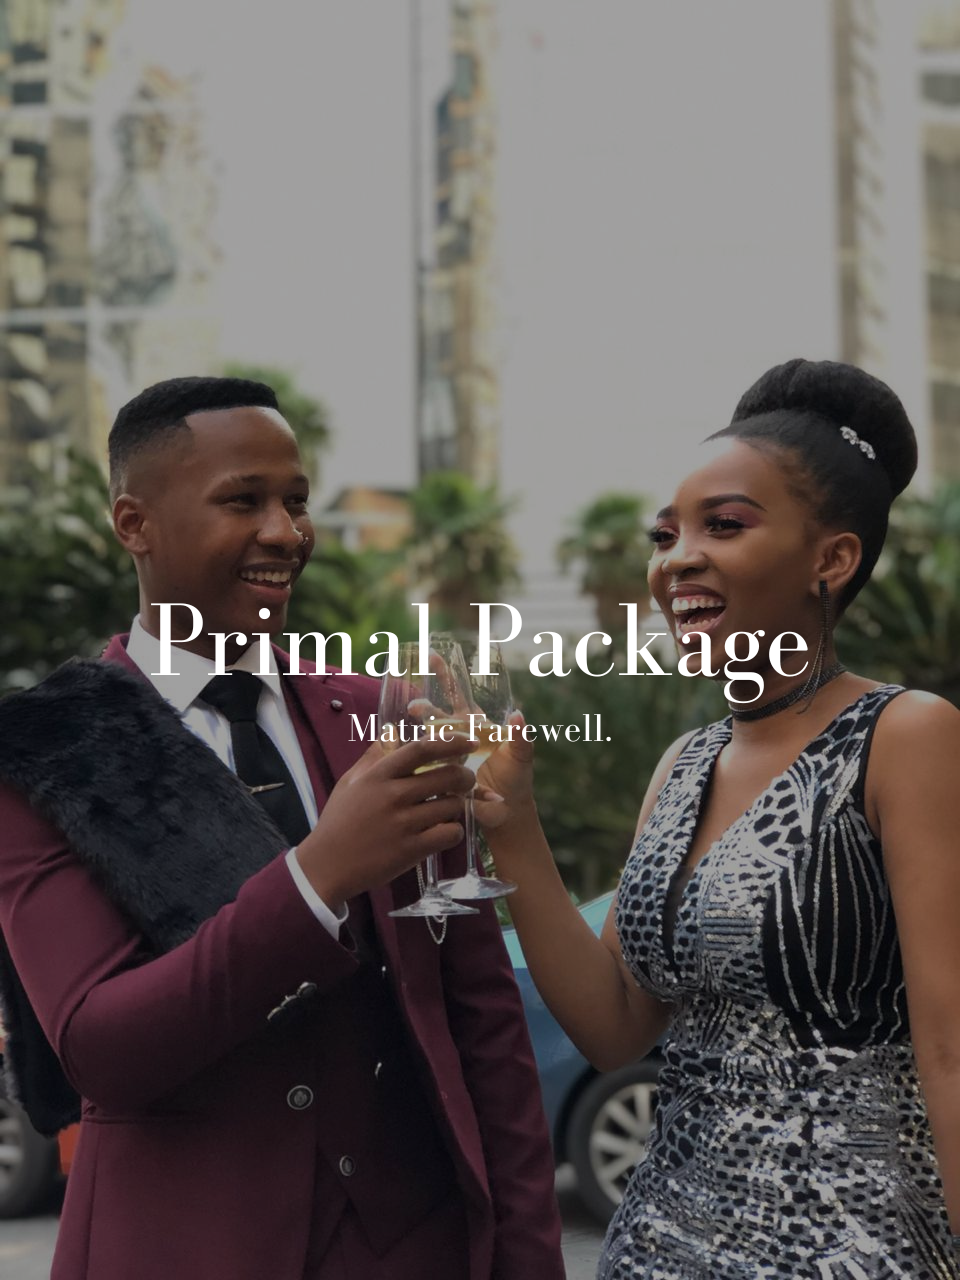 Primal Package | Matric Farewell